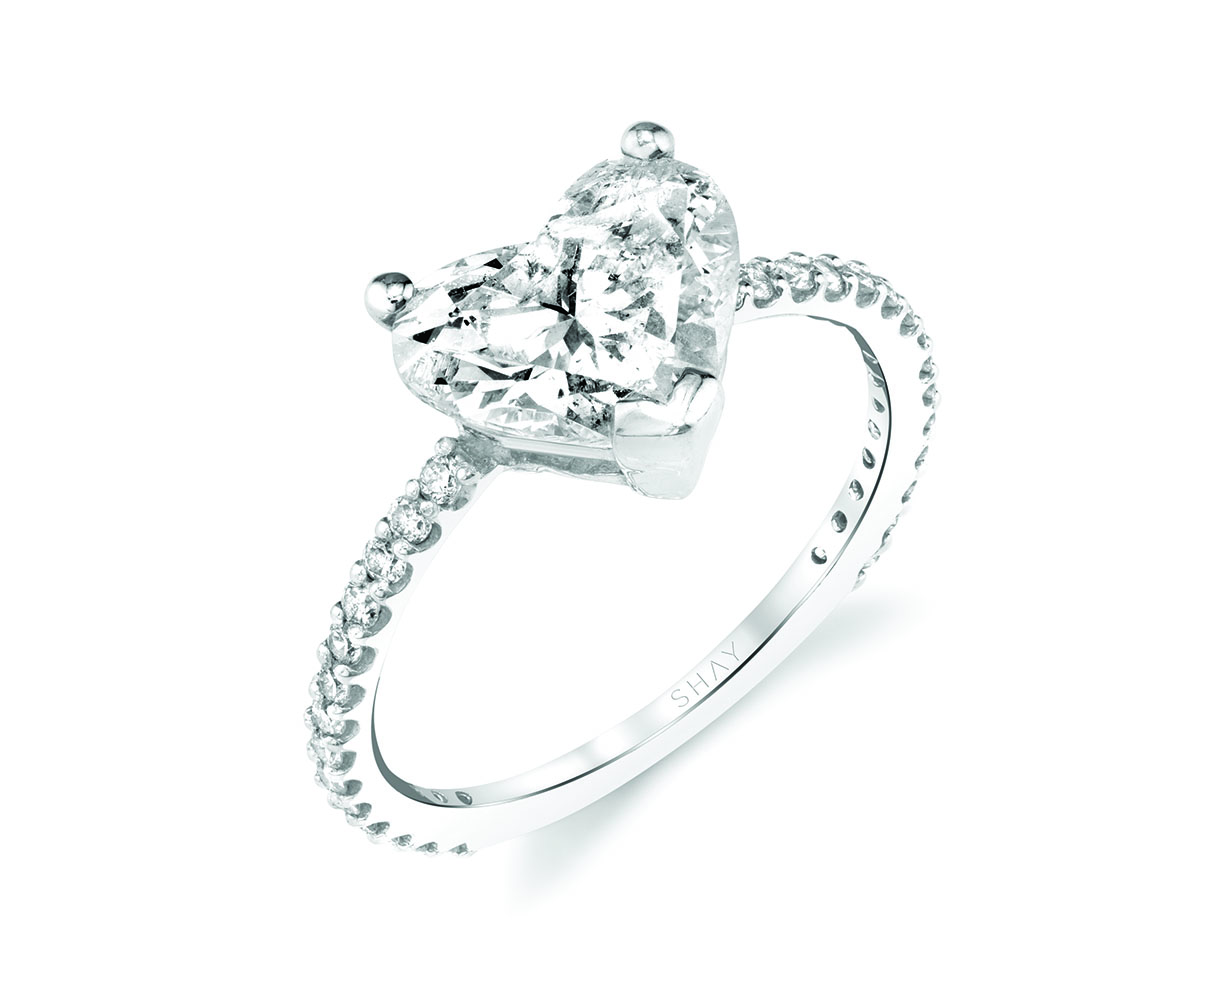 Heart cut diamond center stone engagement ring with platinum pave band